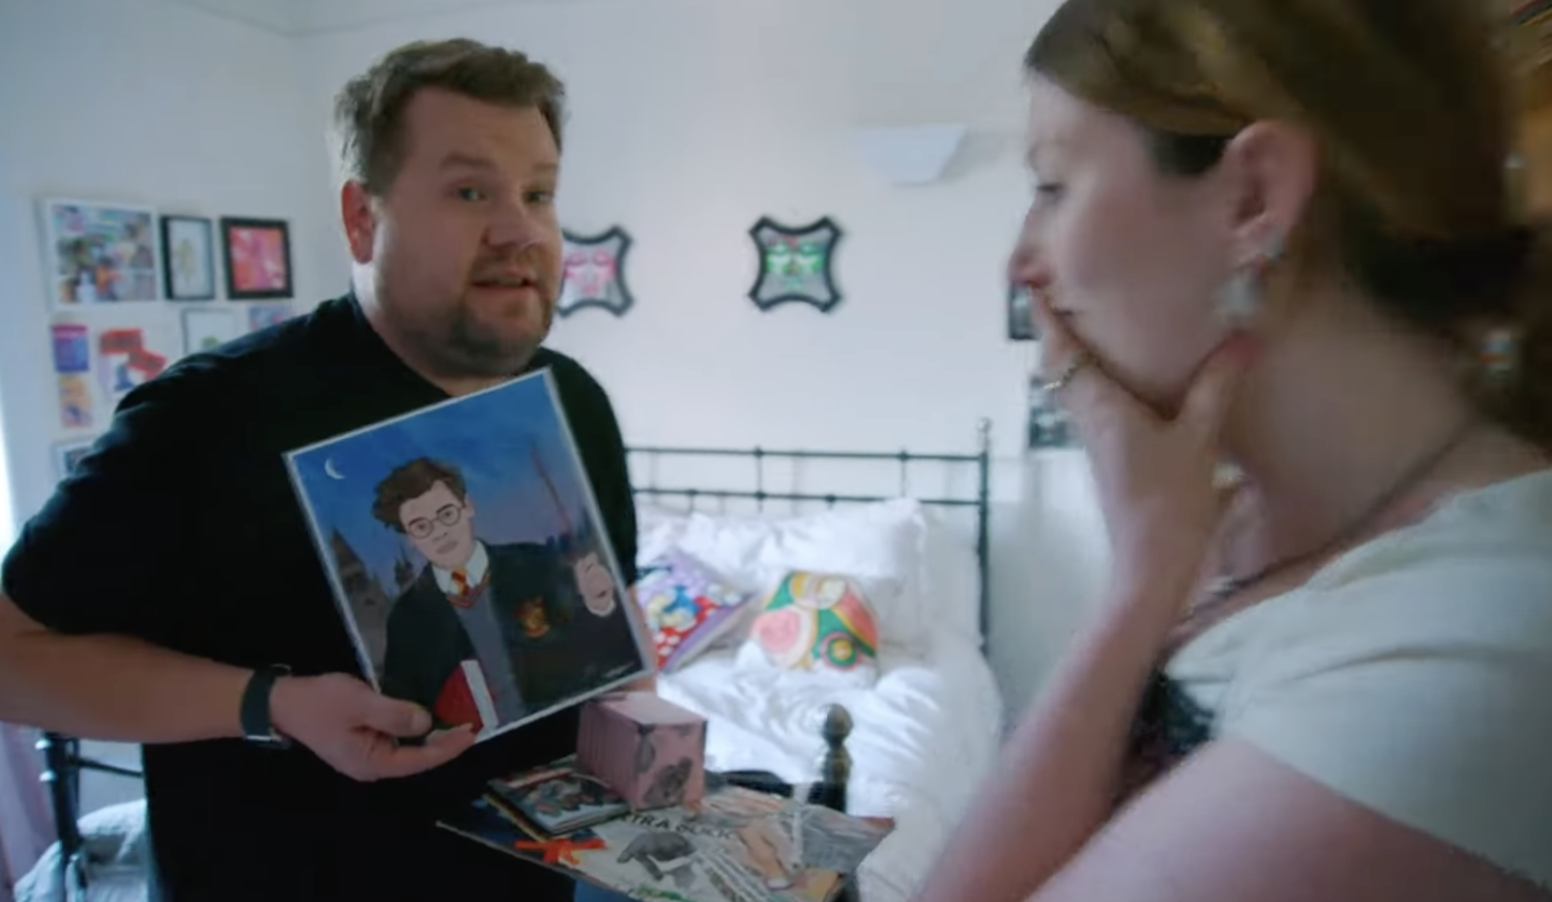 A woman holds a hand over her mouth as Corden faces her and the camera, holding up an illustration of Harry Styles as Harry Potter